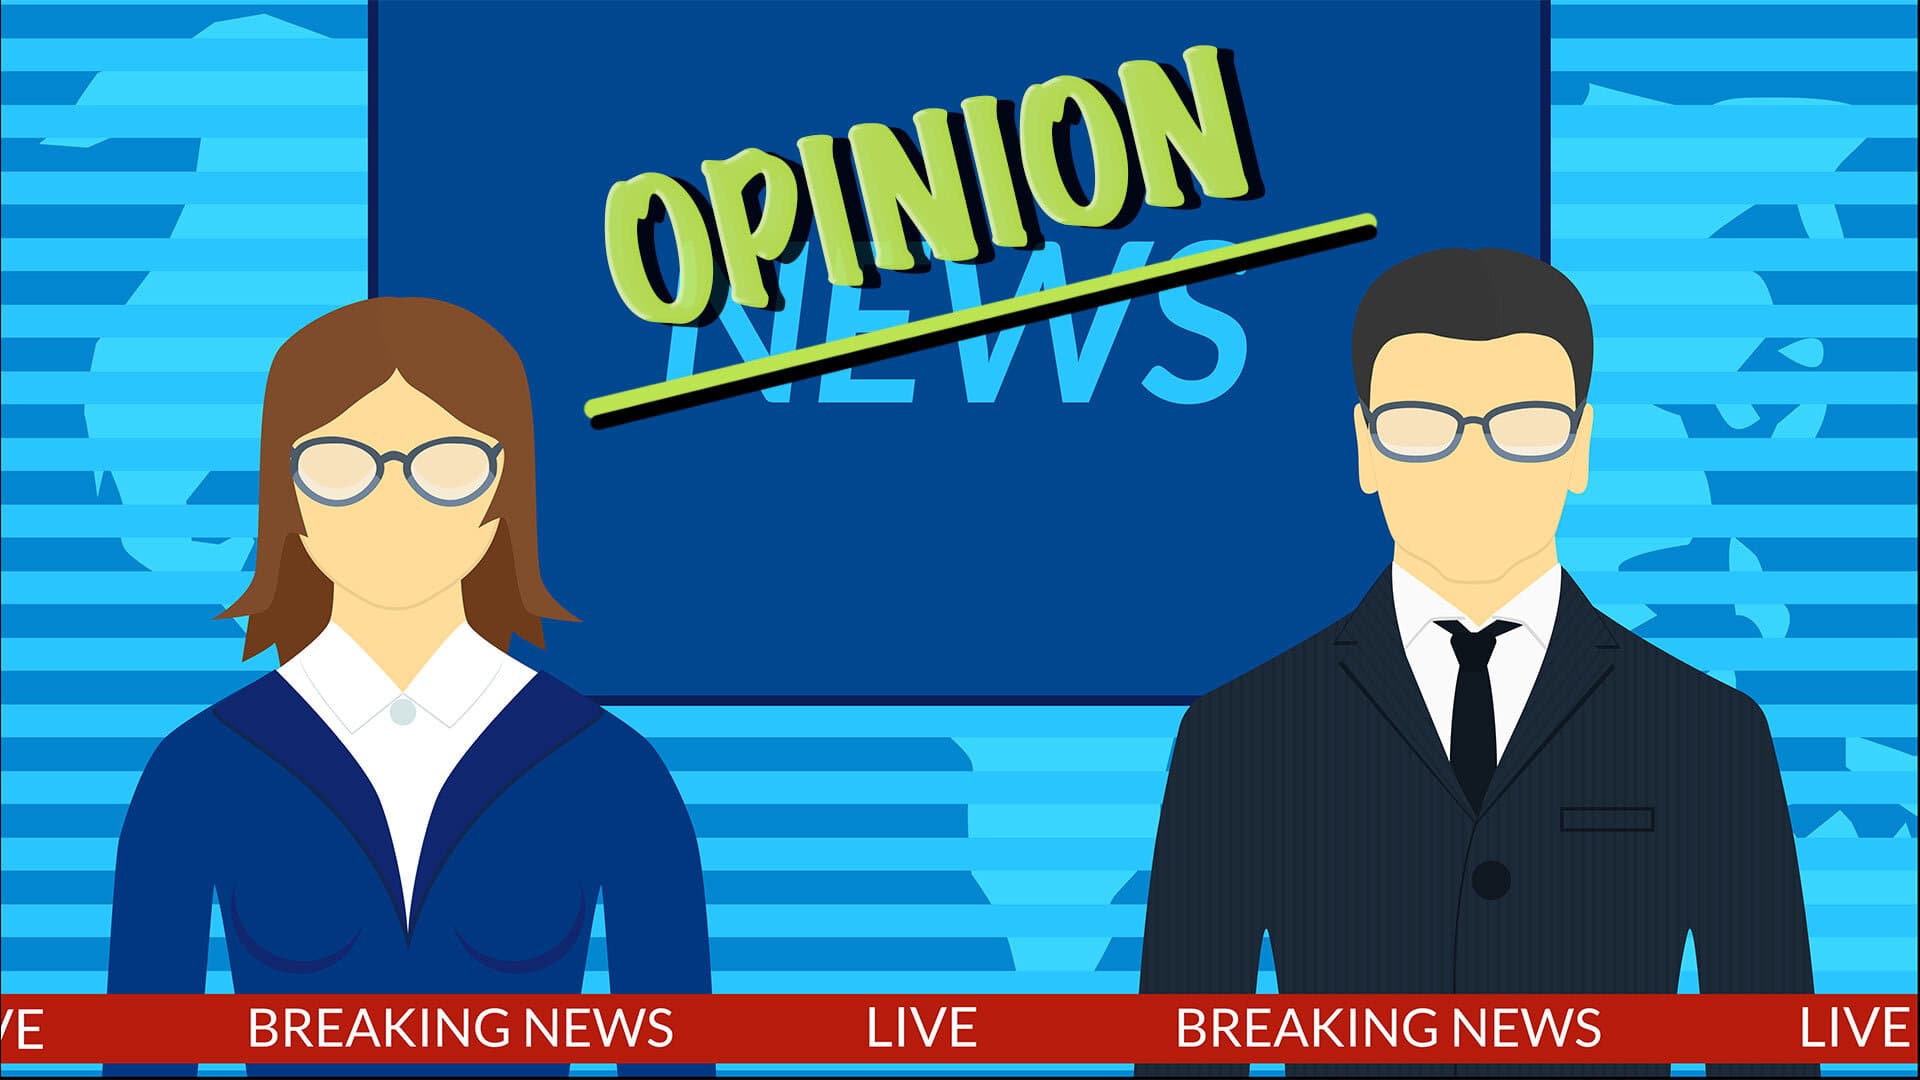 Illustration of news anchors with "News" crossed out to say "Opinion"